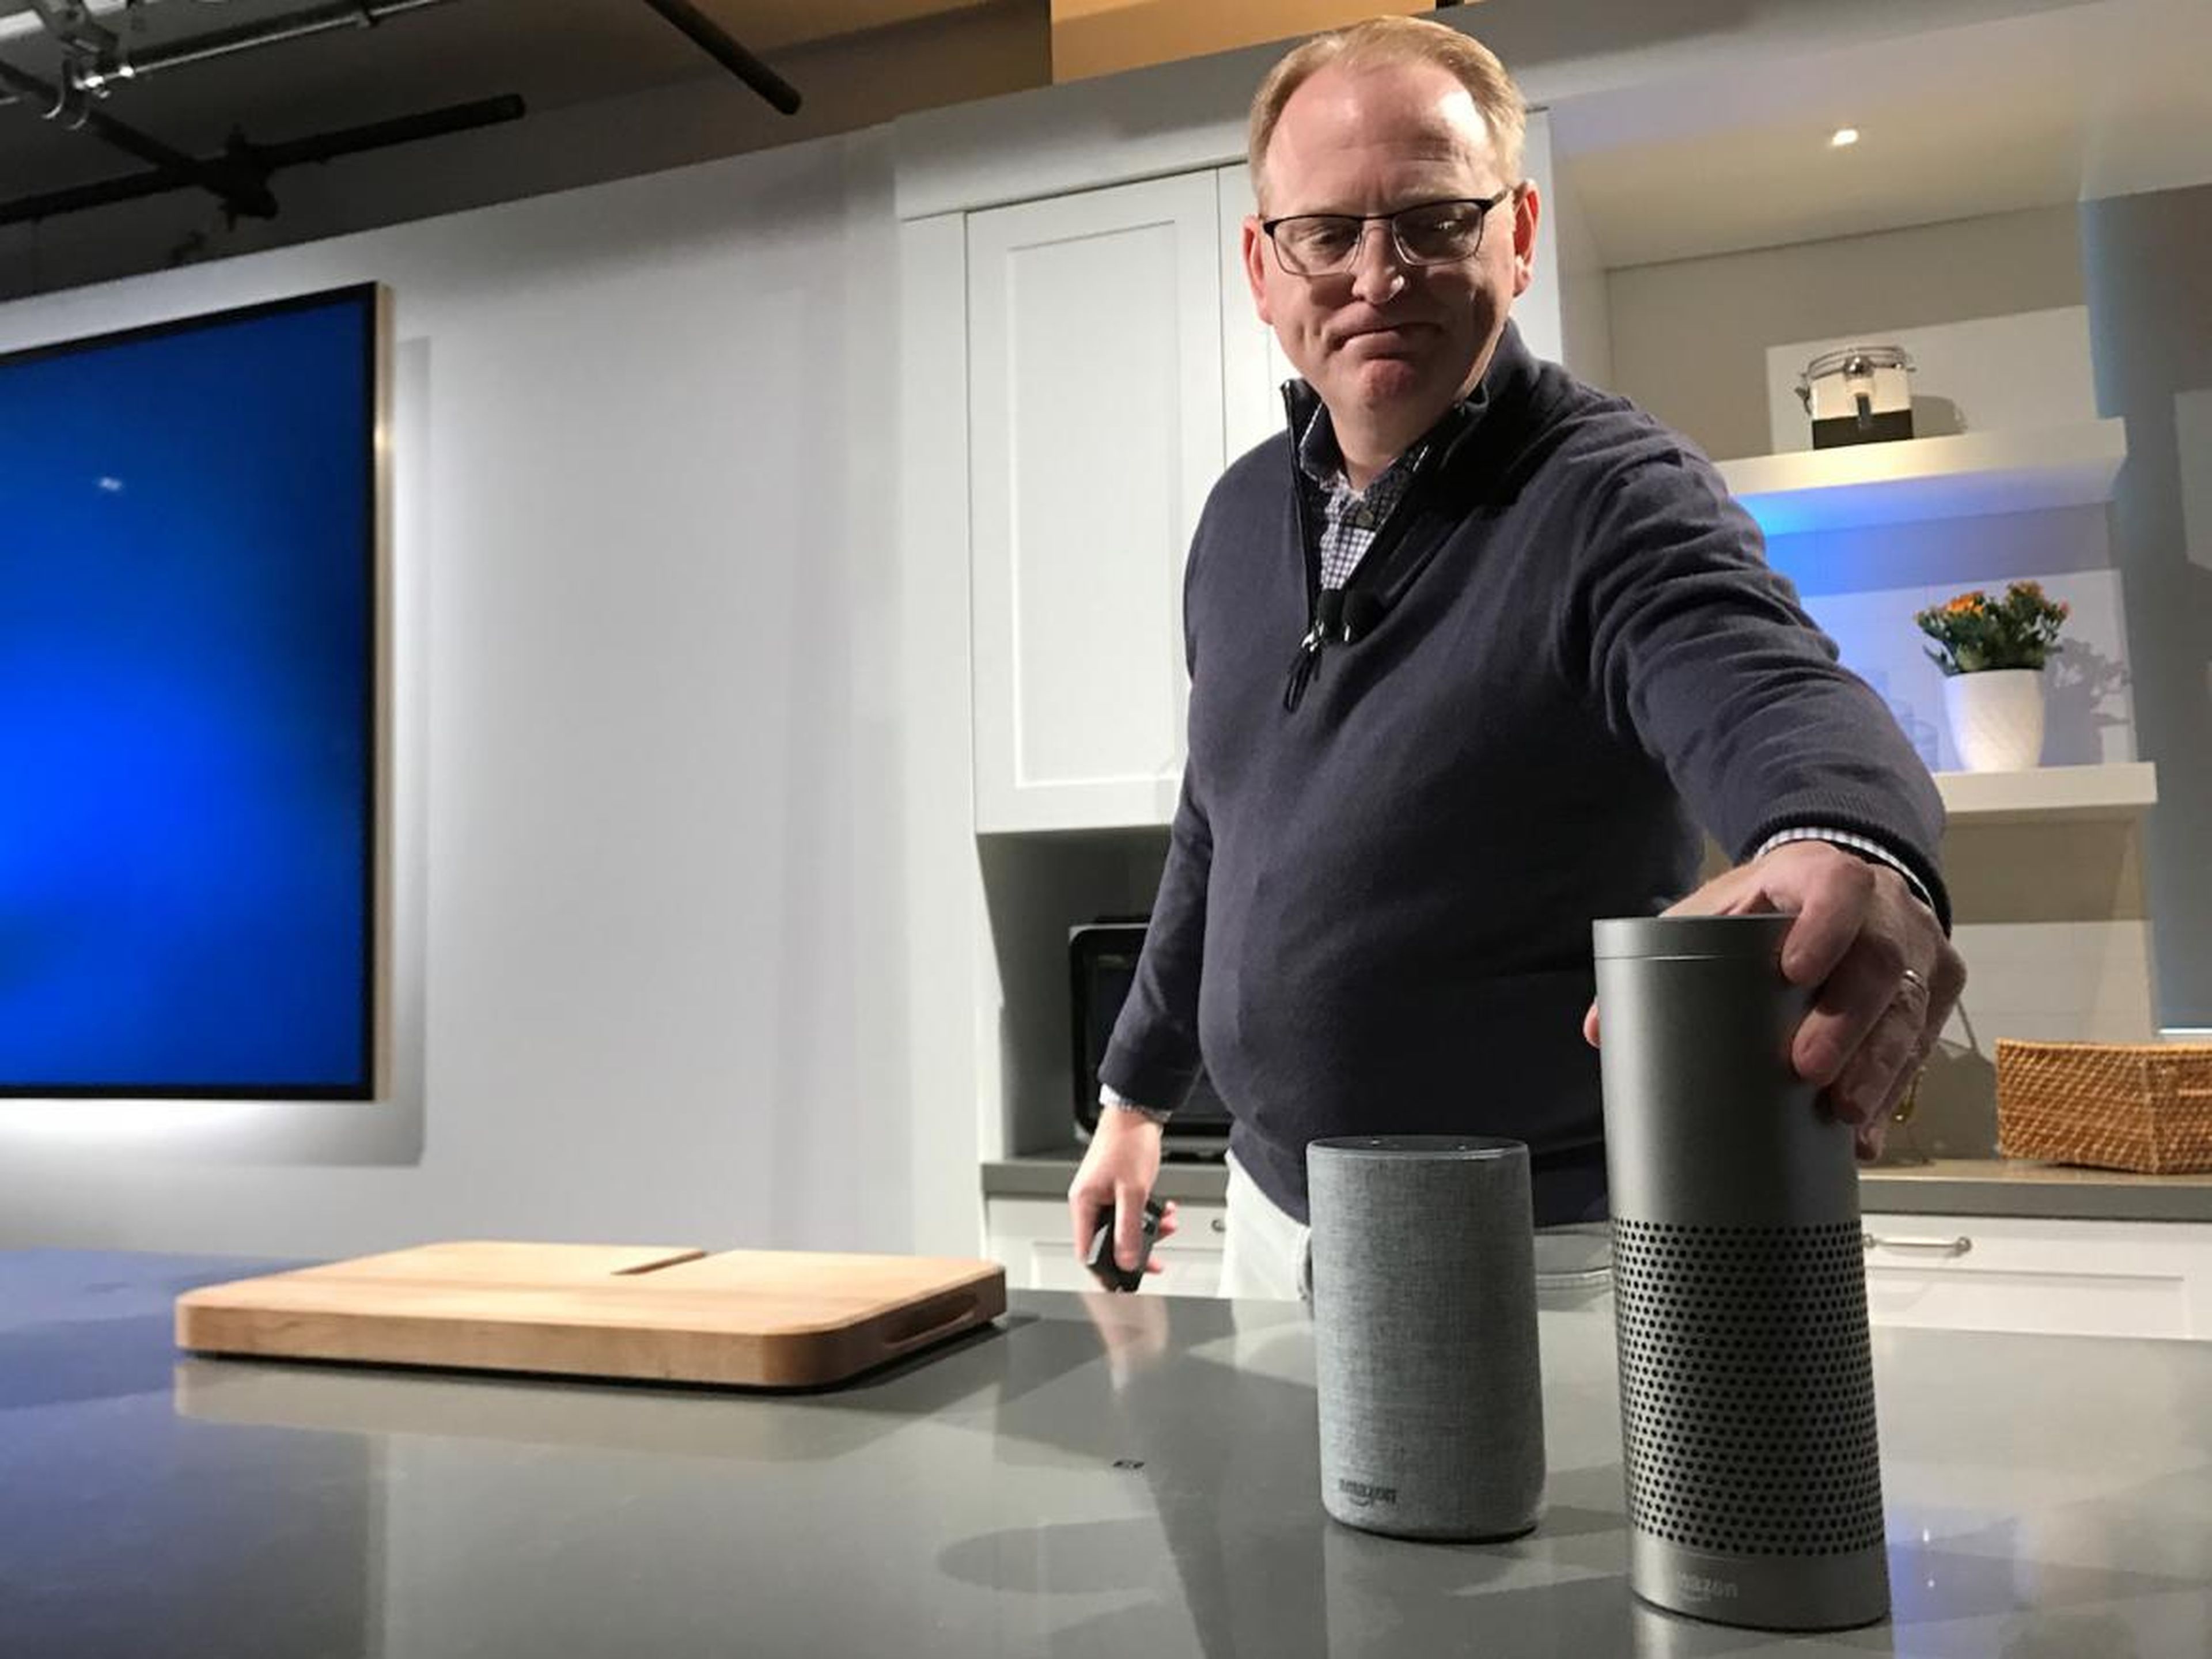 Bezos foresaw a network of appliances connected to the internet — and now we have smart homes tricked out with Alexa devices.